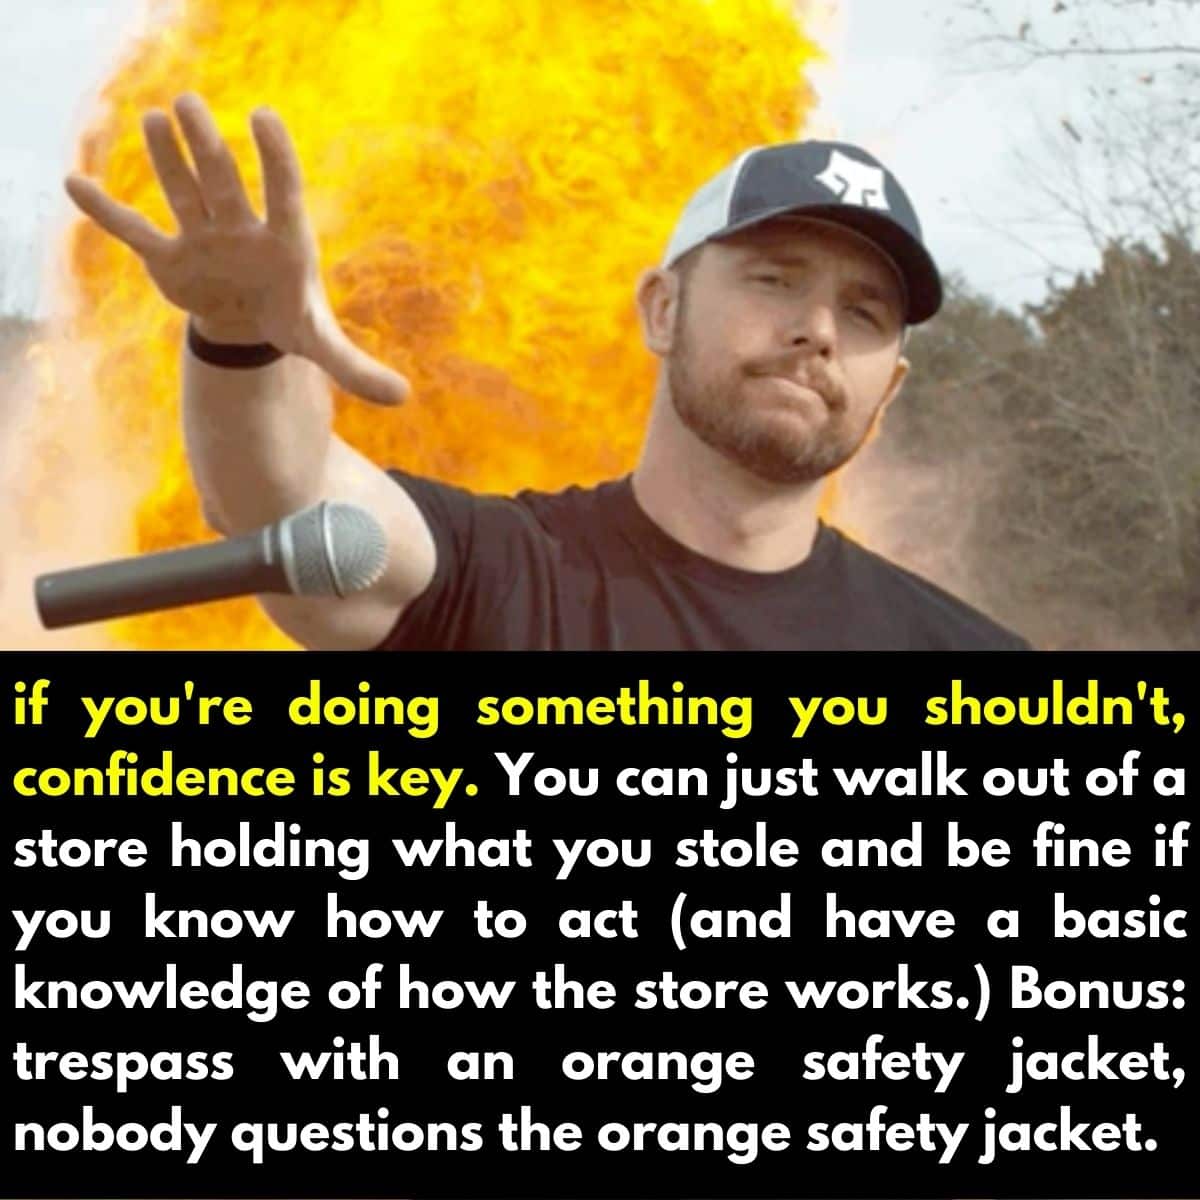 if you're doing something you shouldn't, confidence is key, trespass with an orange safety jacket, nobody questions the orange safety jacket